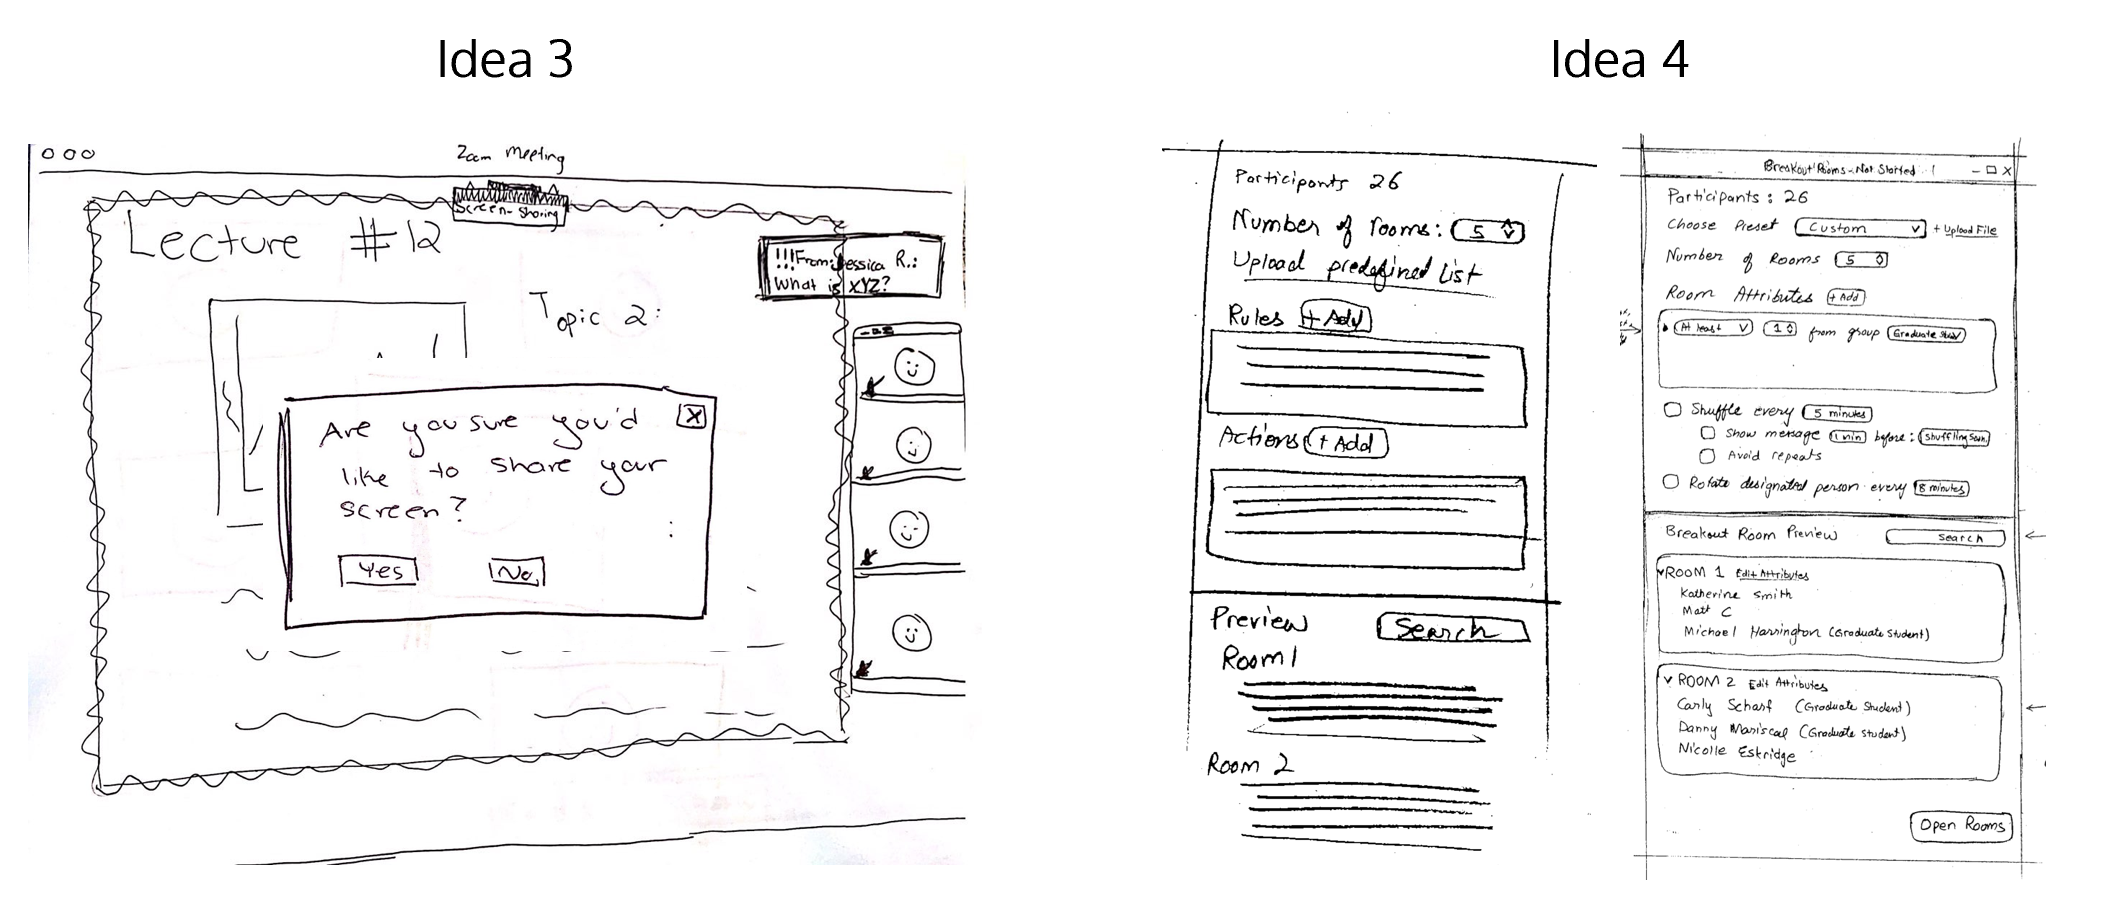 Low fidelity wireframes for ideas 3 and 4